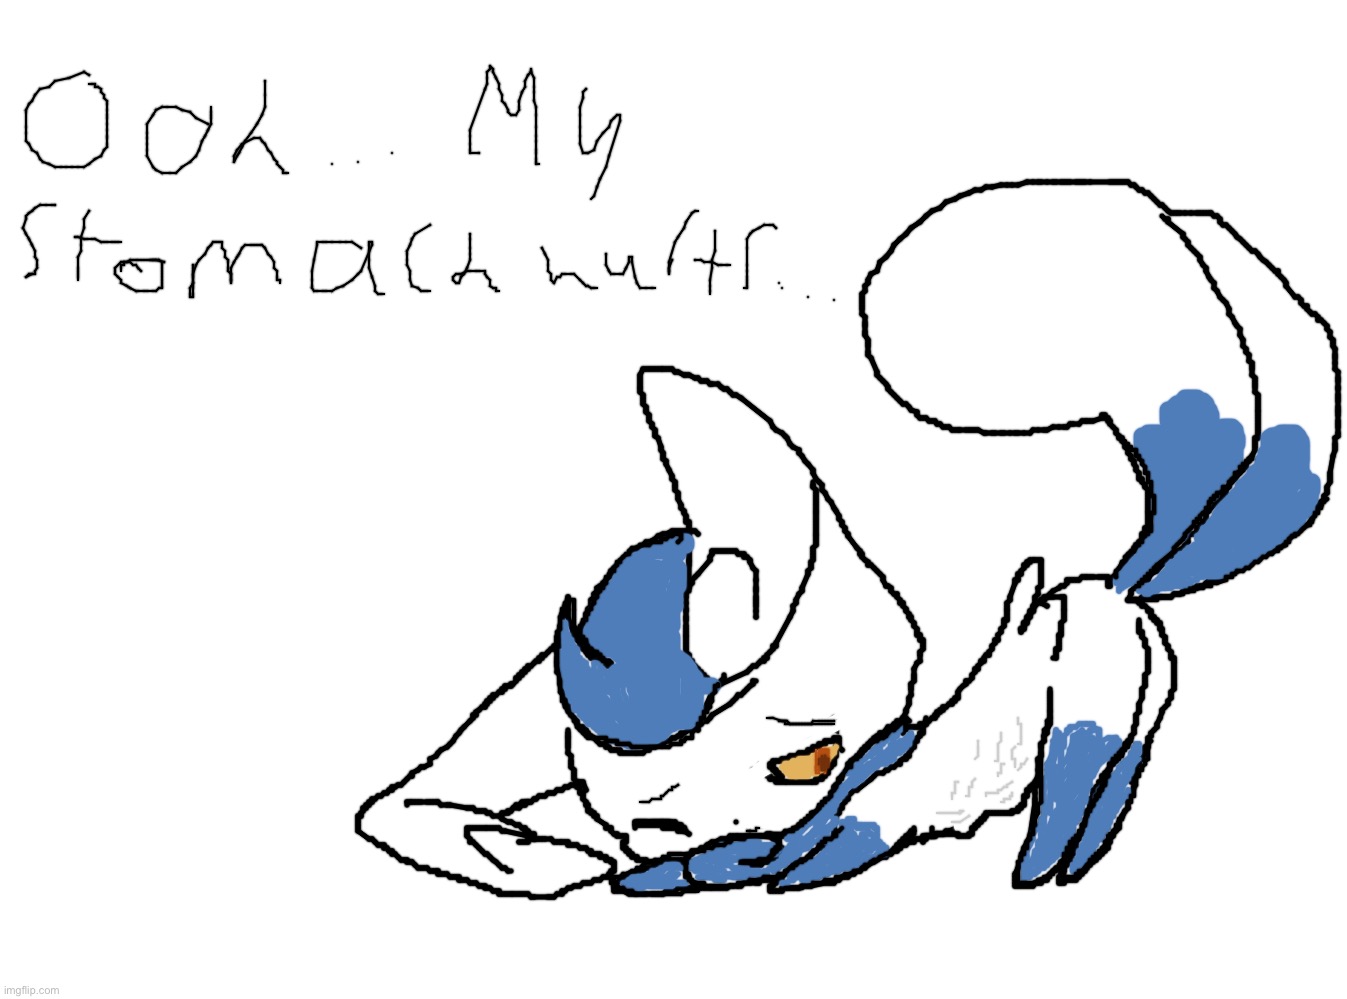 Meowstic's stomach growling | image tagged in memes,blank transparent square | made w/ Imgflip meme maker